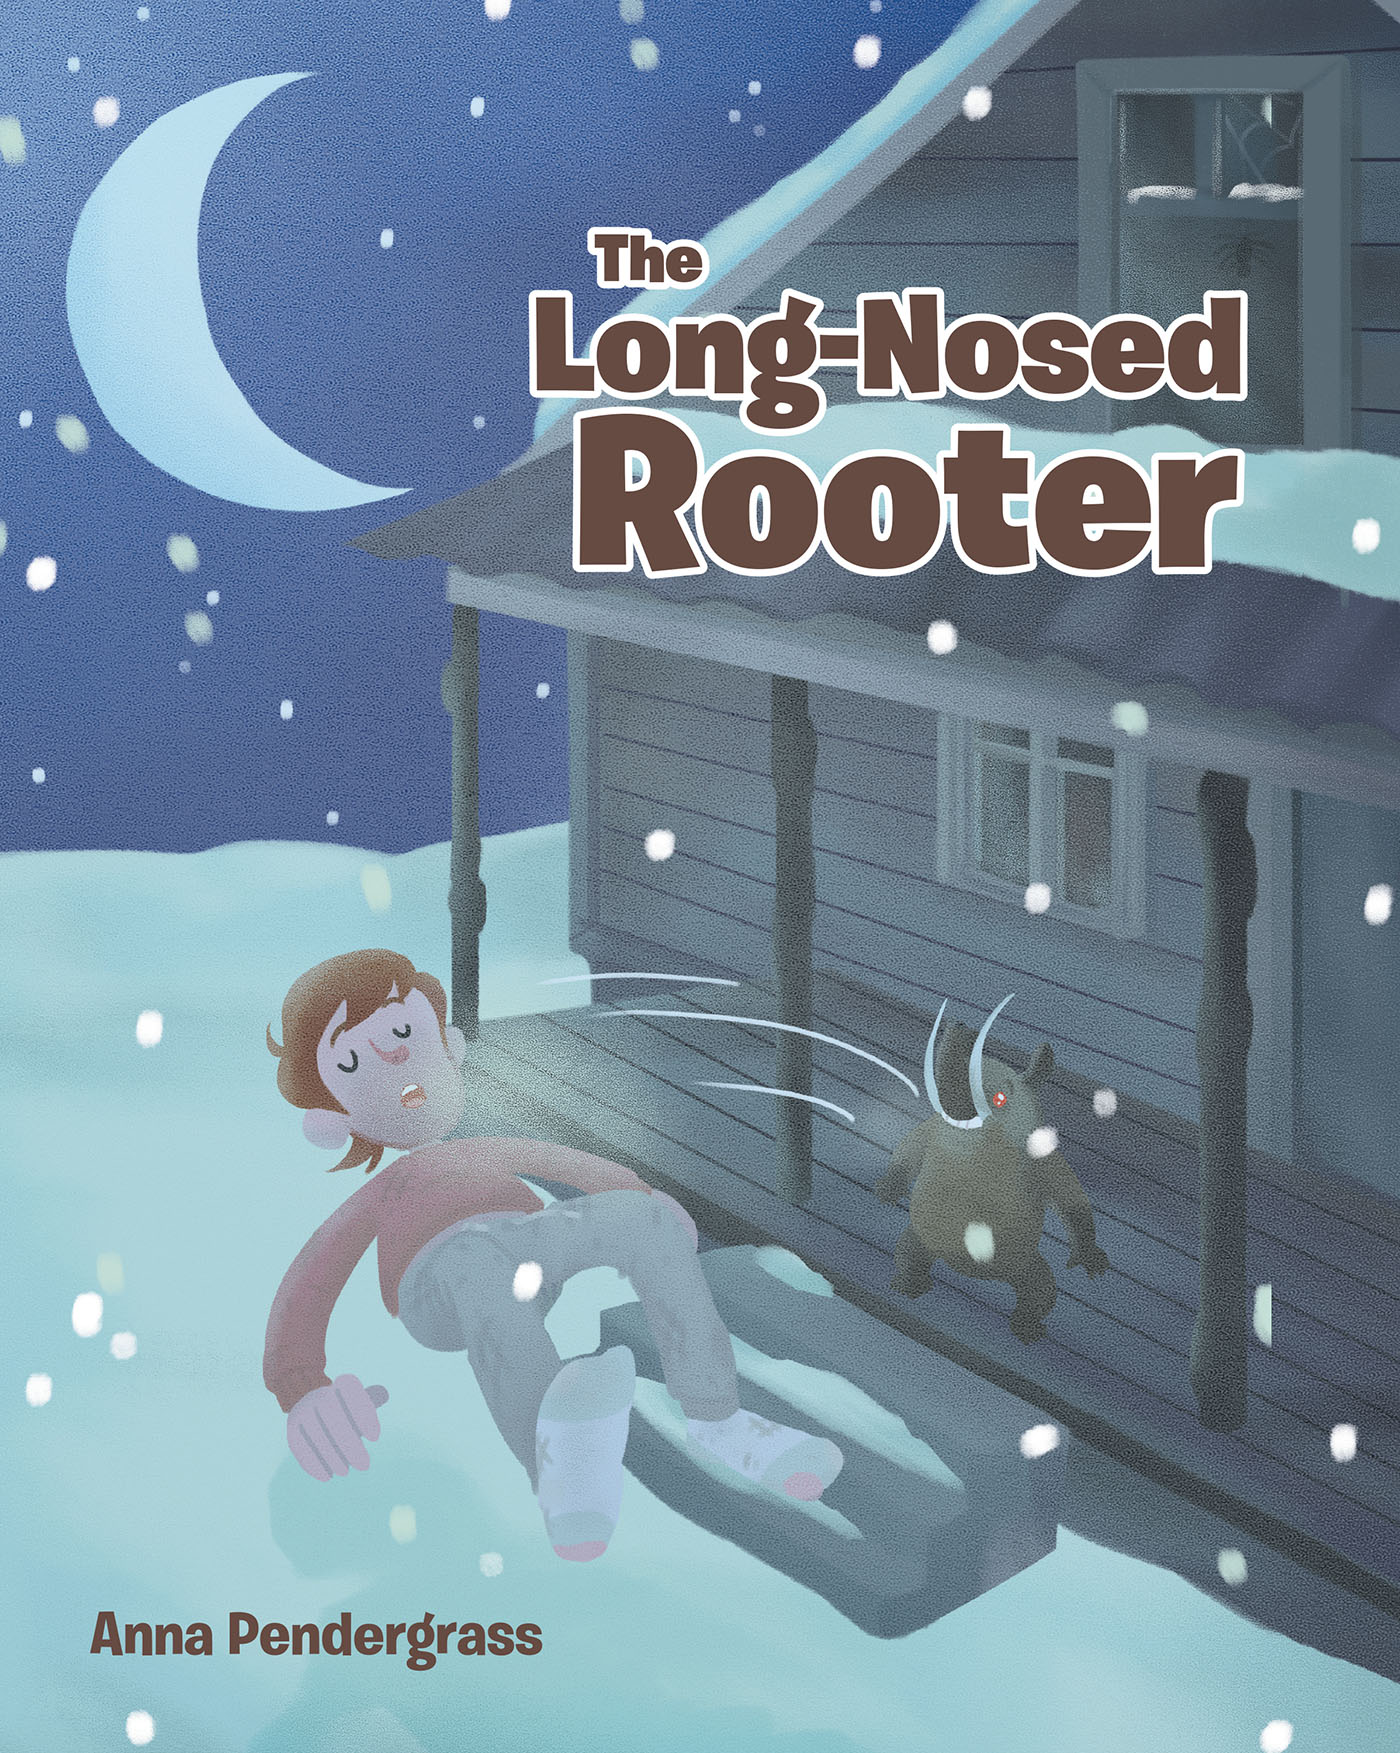 Anna Pendergrass’s Newly Released "The Long-Nosed Rooter" is a Unique and Enjoyable Story That Showcases the Need to Trust in God